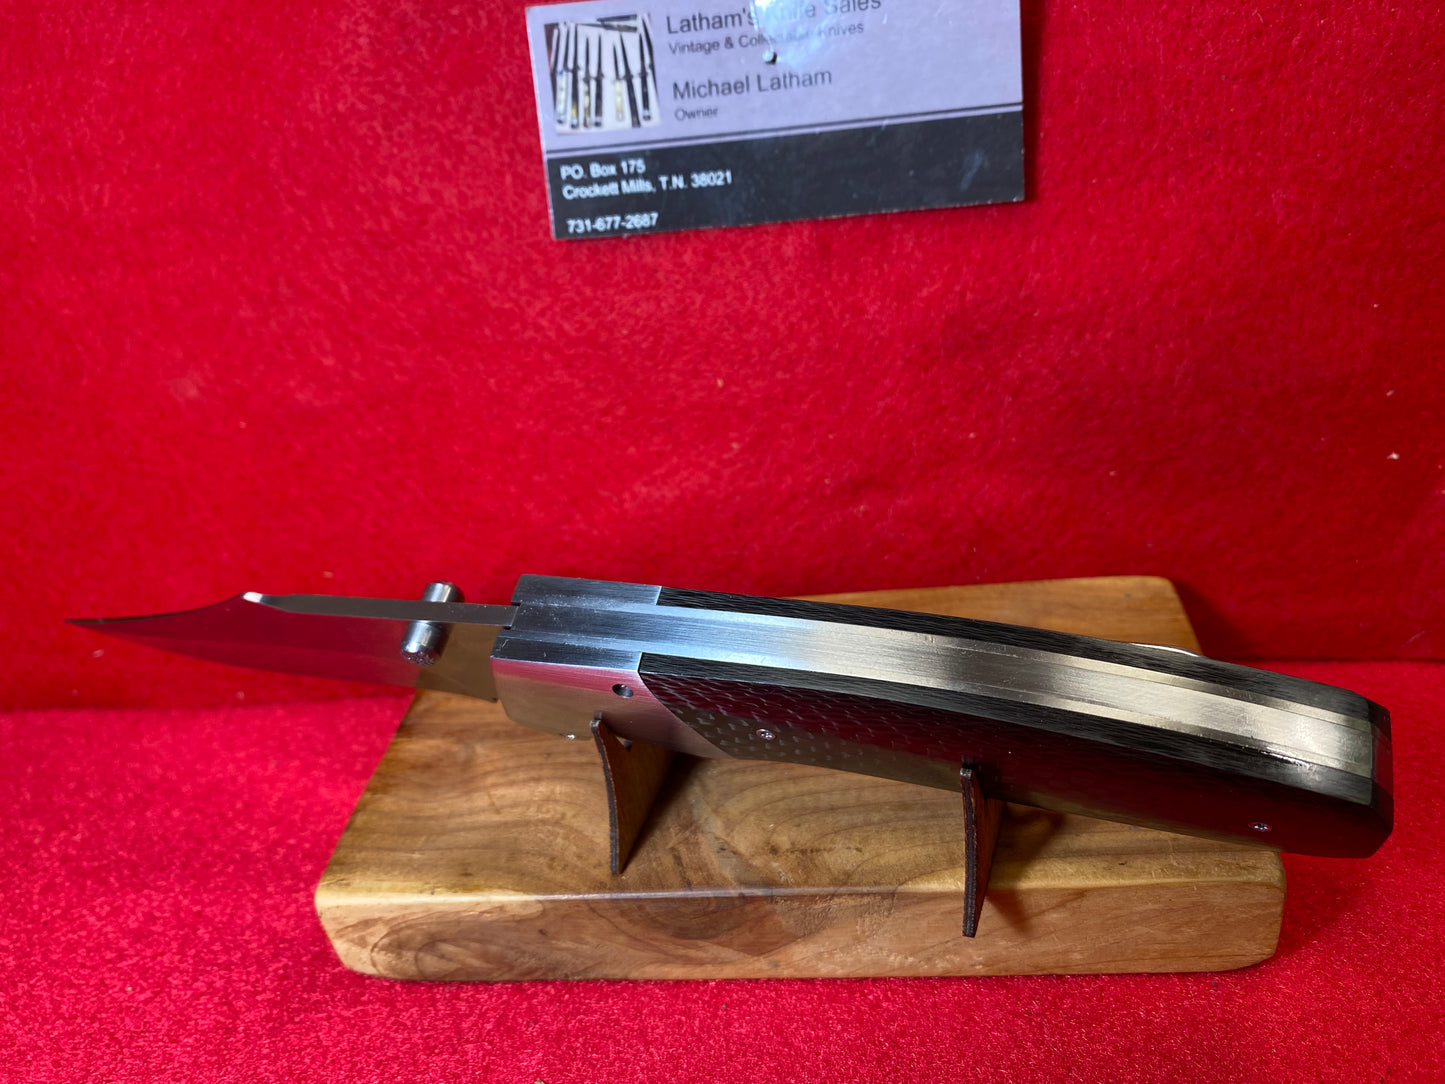 VALLOTTON, R.C.  "FREEDOM FIGHTERS" 2018-20 CUSTOM AUTOMATIC KNIFE DOUBLE ACTION SCALE RELEASE CARBON FIBER HANDLES